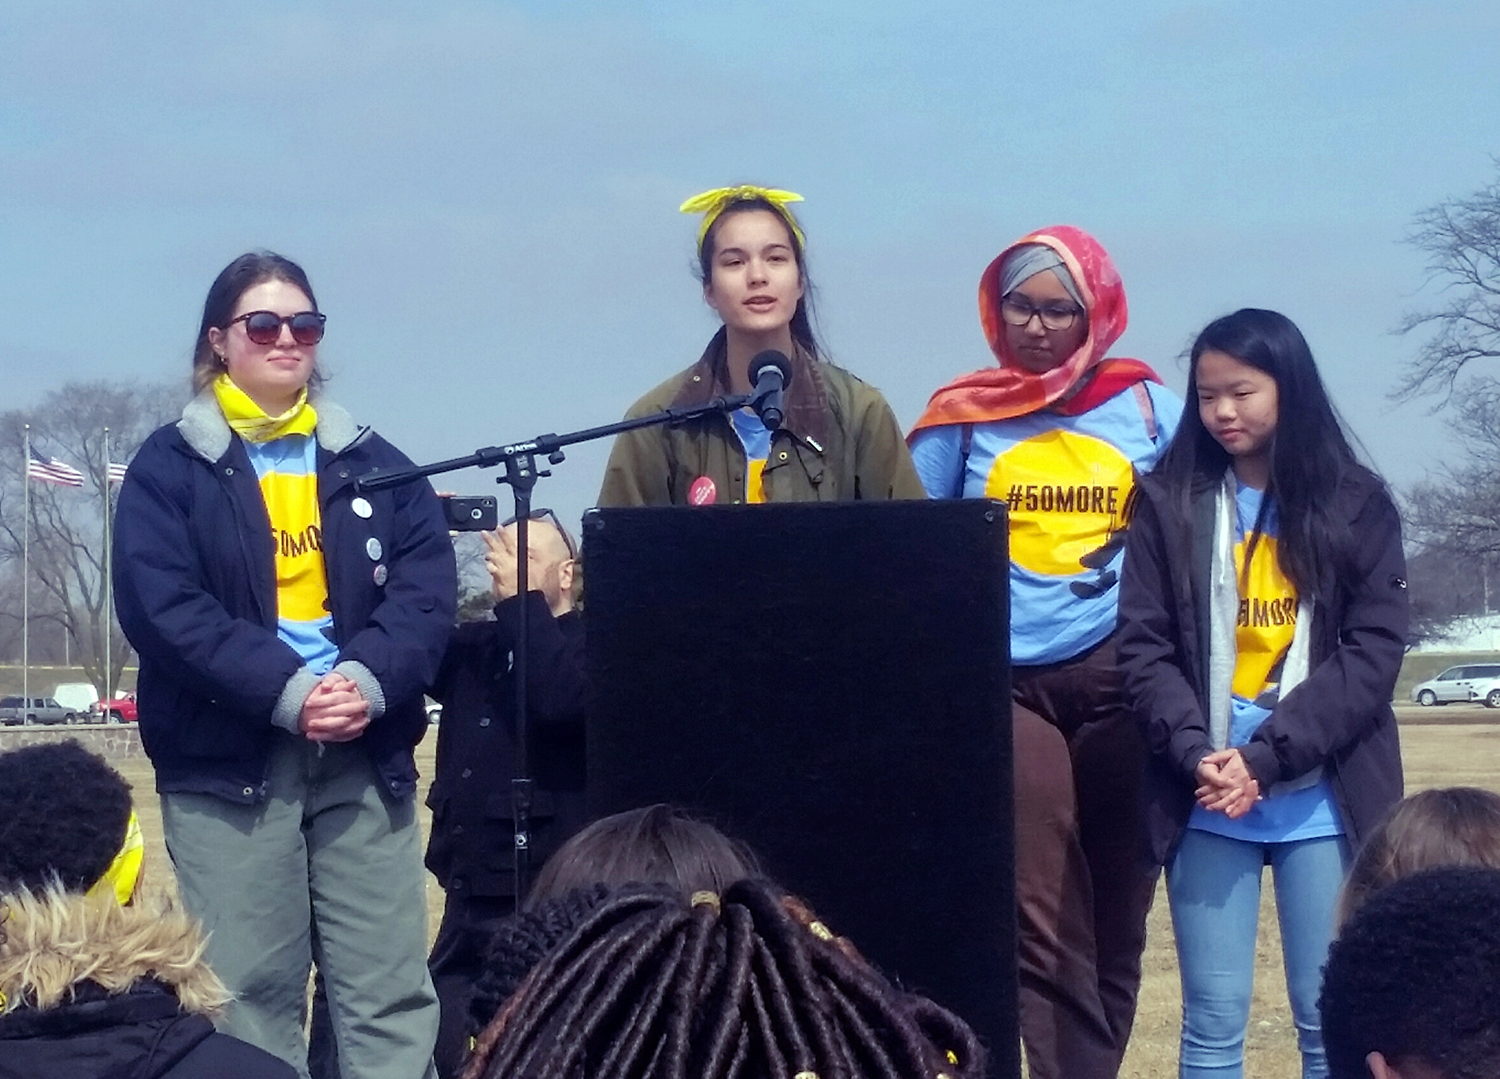 Student marchers speak at a rally